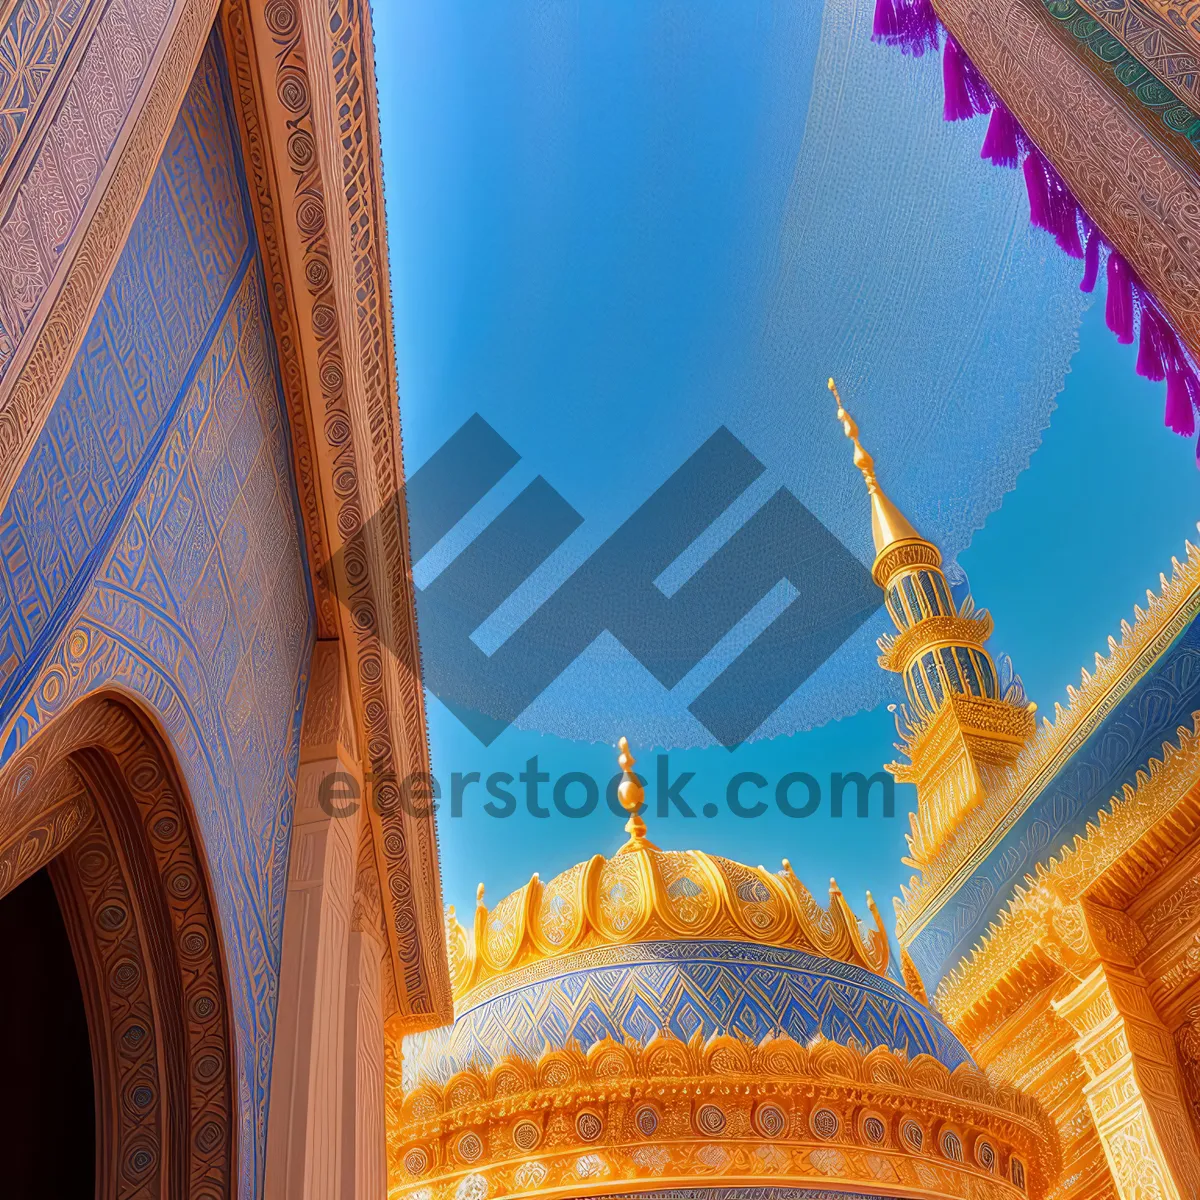 Picture of Glorious Minaret Piercing the Historic City Skyline